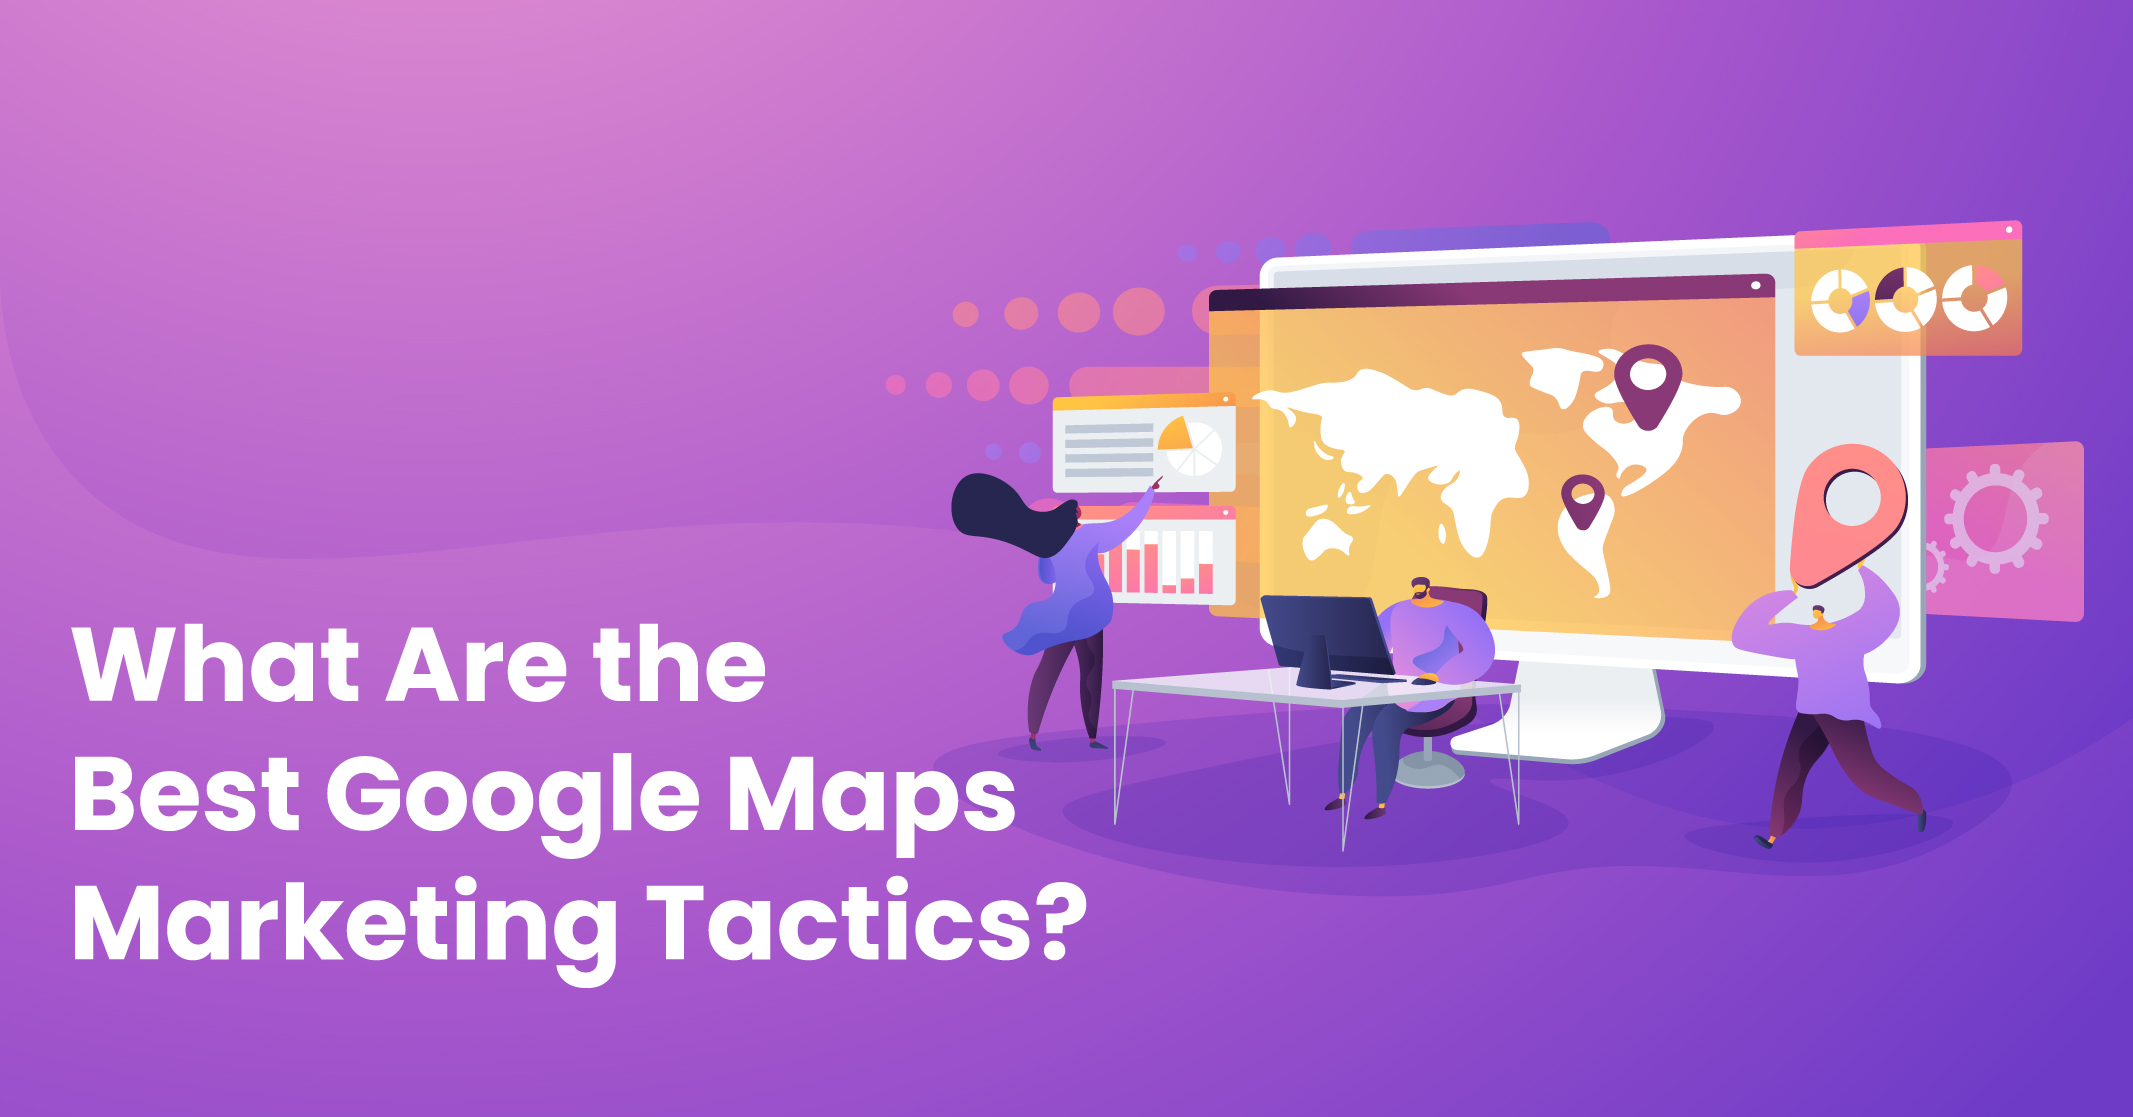 8 Google Maps Marketing Tactics to Drive Local Business